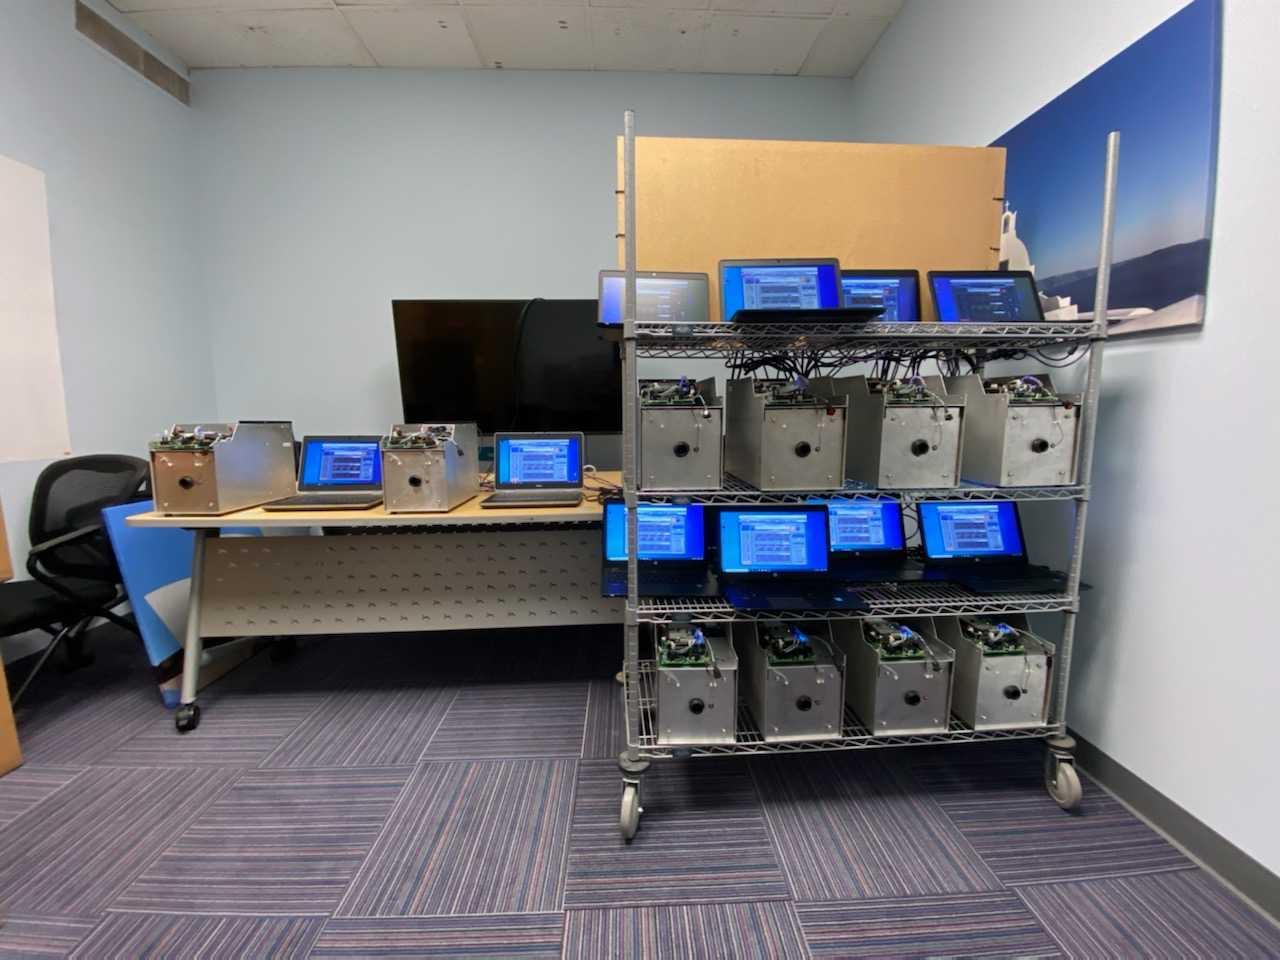 Computers sit untouched in a conference room at IngMar Medical's East Liberty office. While machine assemblers still work at the building, the company's research and development staff is largely working from home due to the coronavirus. (Courtesy of IngMar Medical)